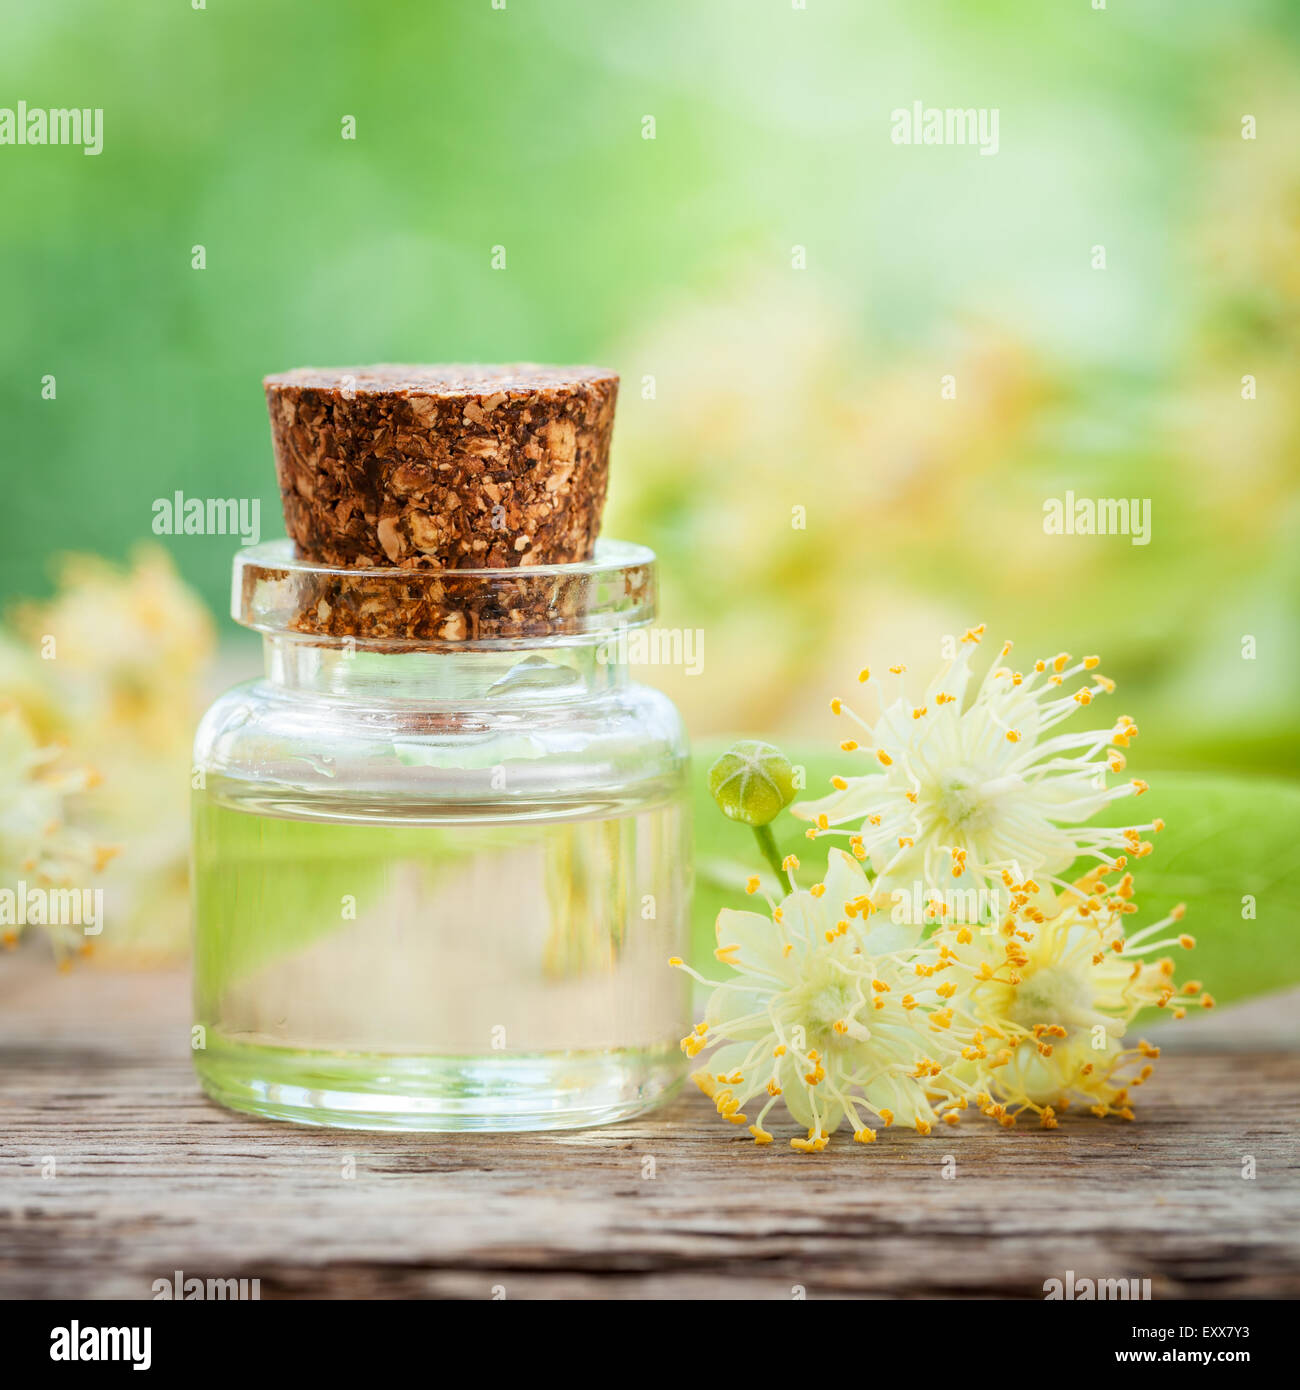 Bottle of essential linden oil and yellow lime flowers. Stock Photo